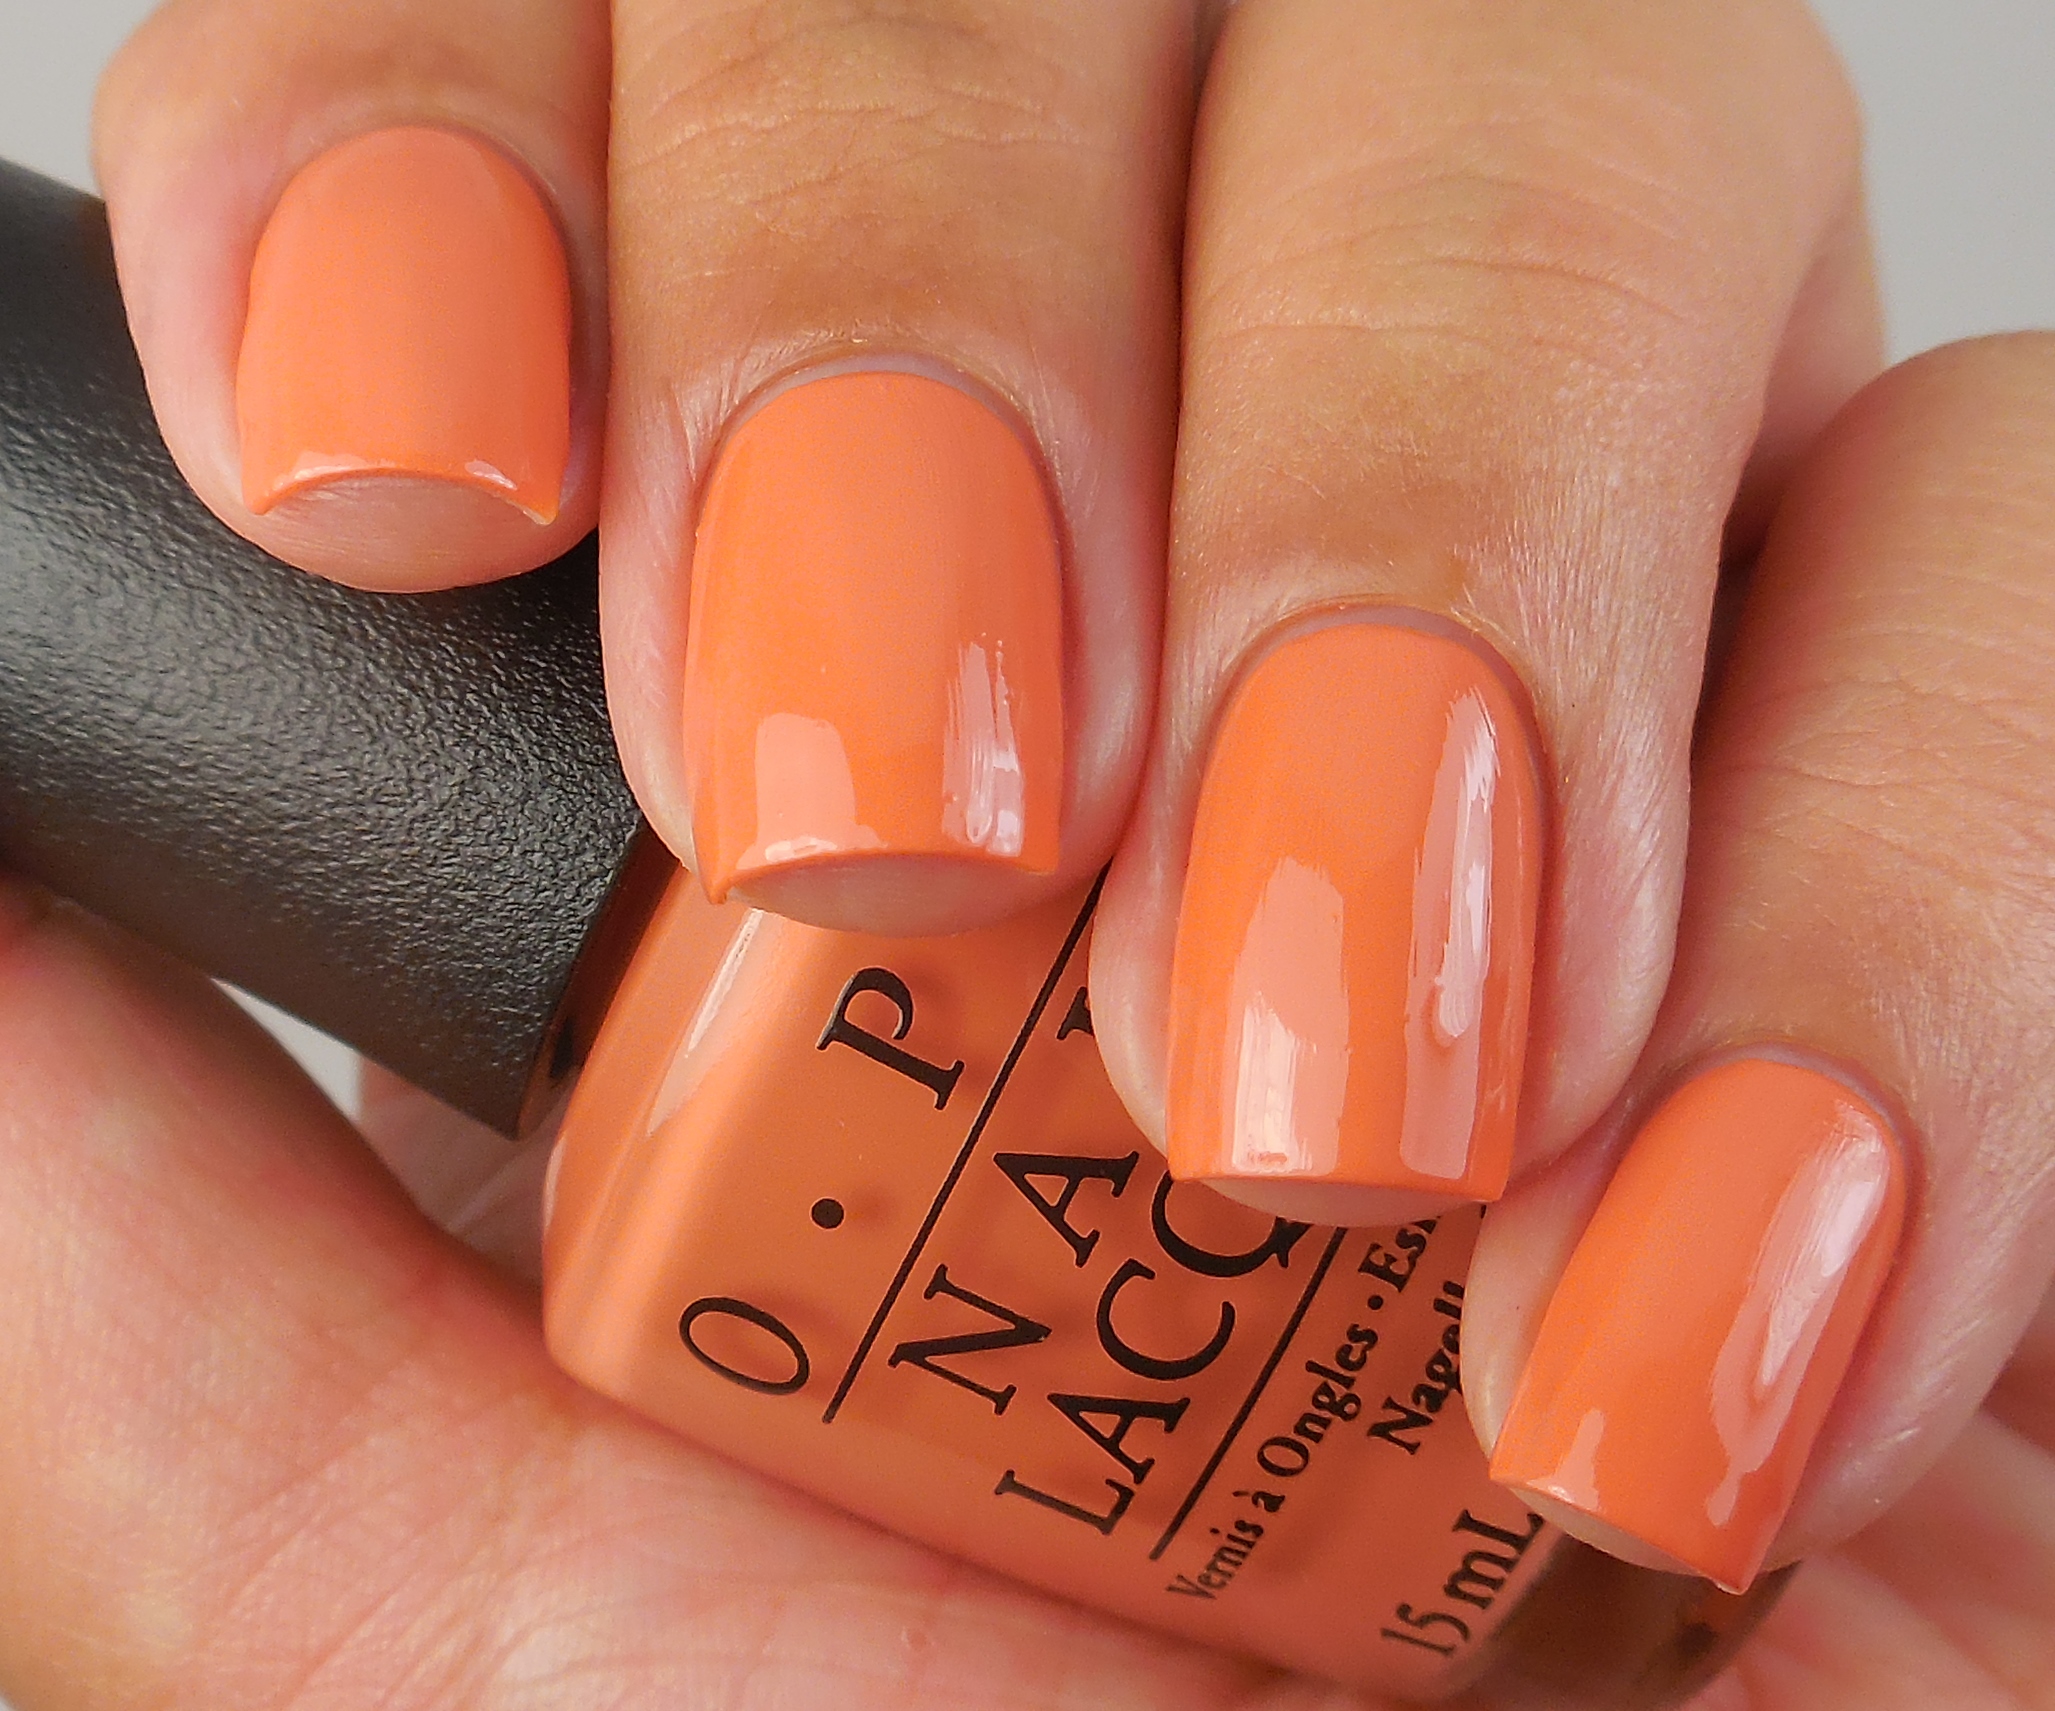 3. OPI Nail Lacquer in Peach Side Babe - wide 1